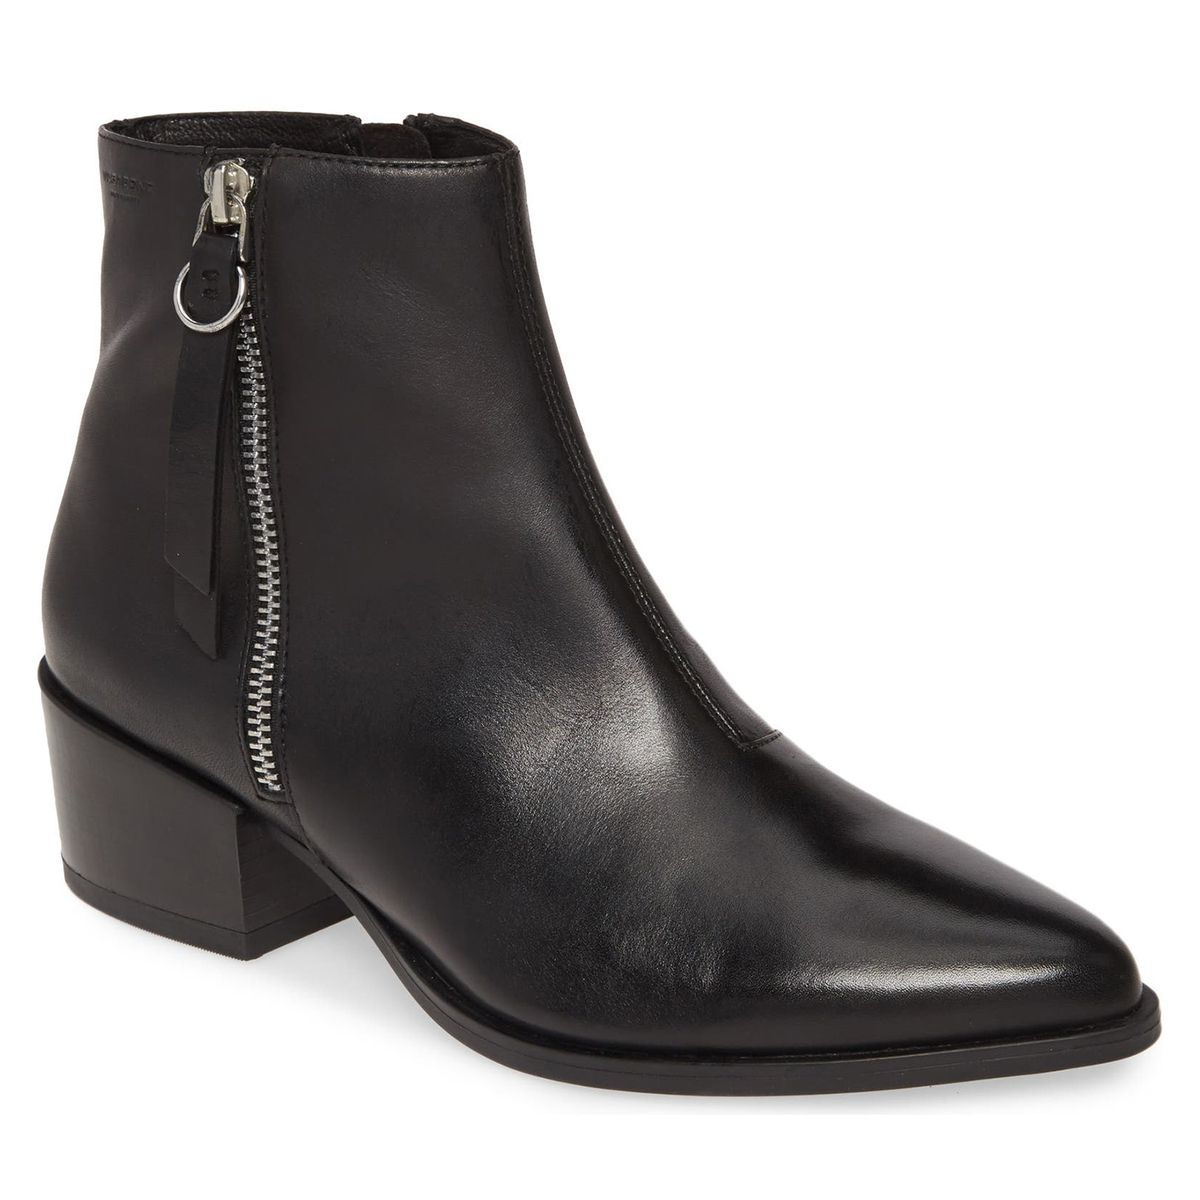 Nordstrom Fashion Boots